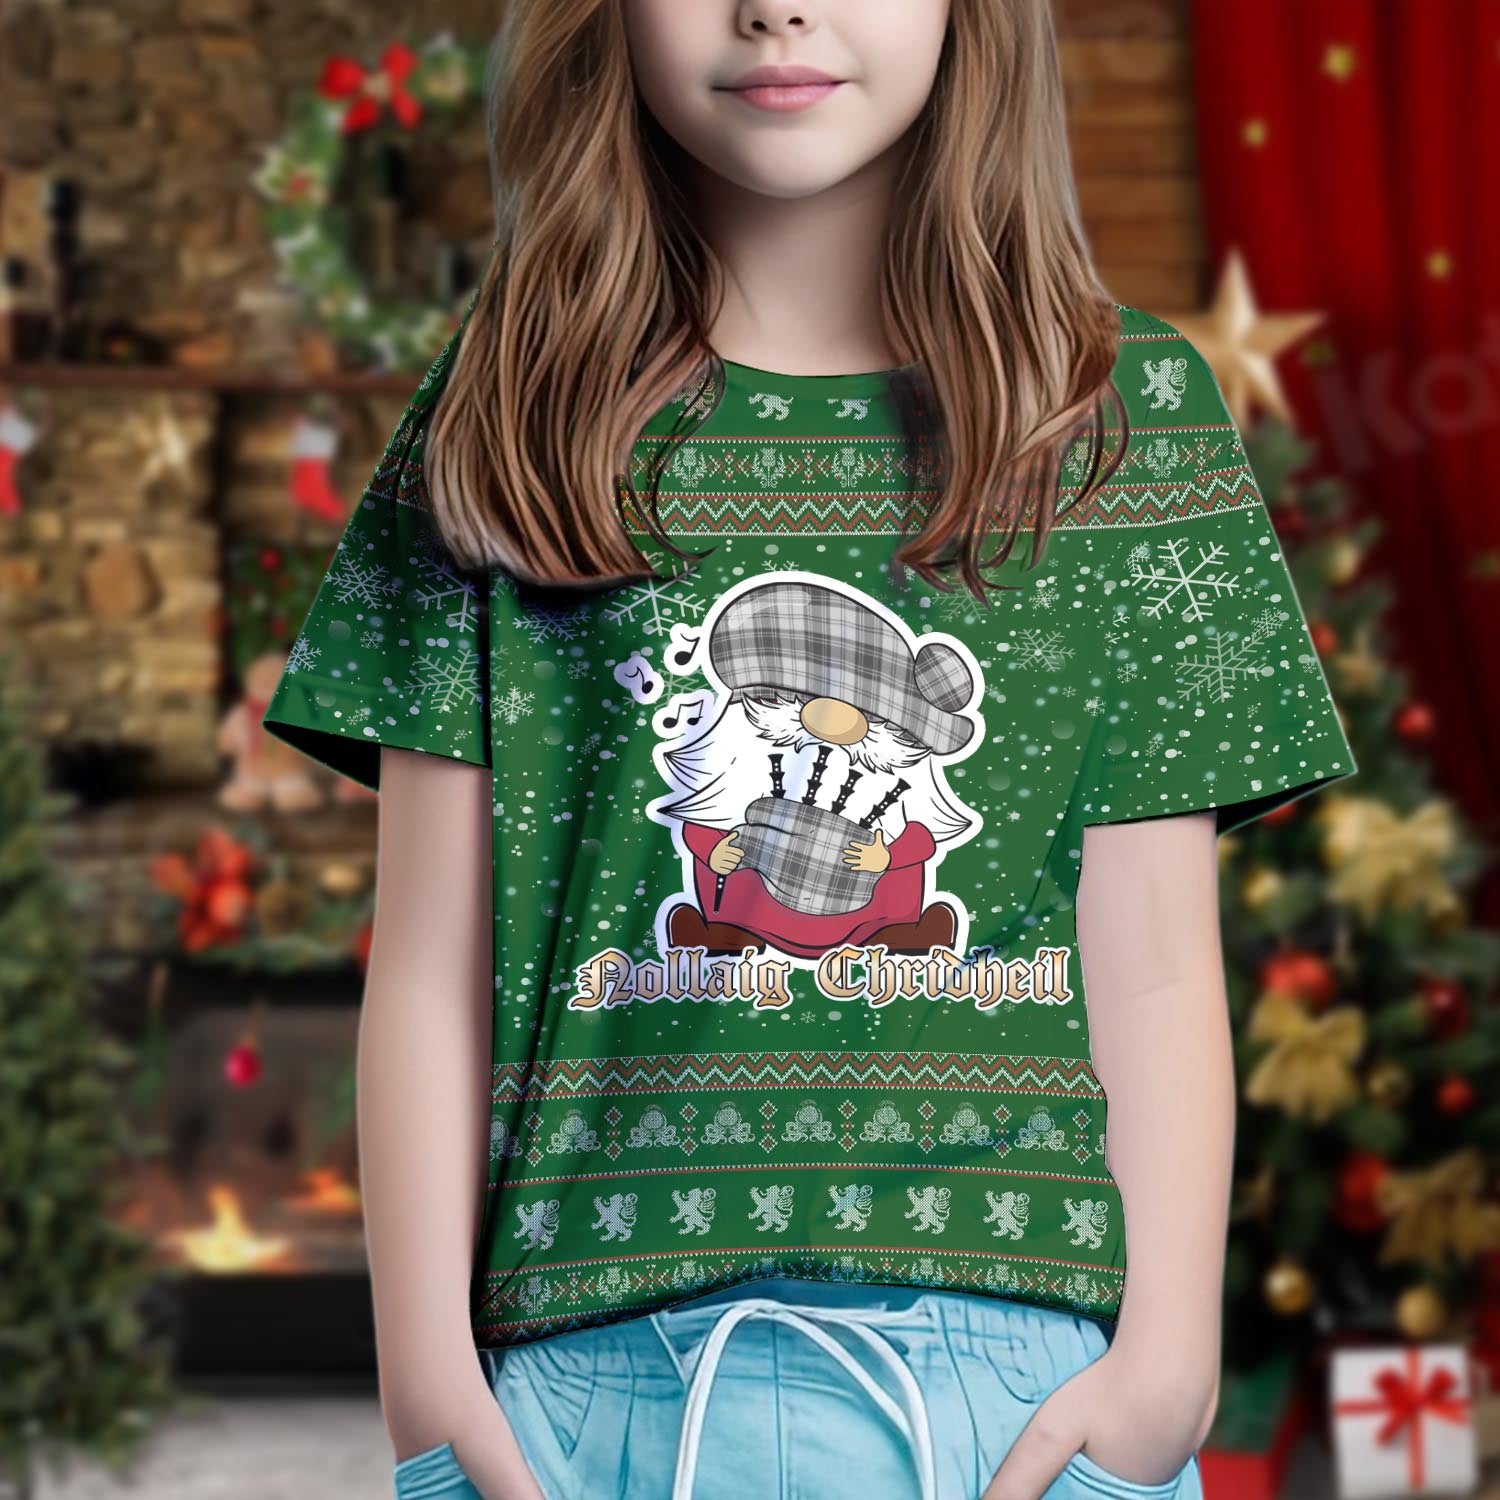 Glendinning Clan Christmas Family T-Shirt with Funny Gnome Playing Bagpipes Kid's Shirt Green - Tartanvibesclothing